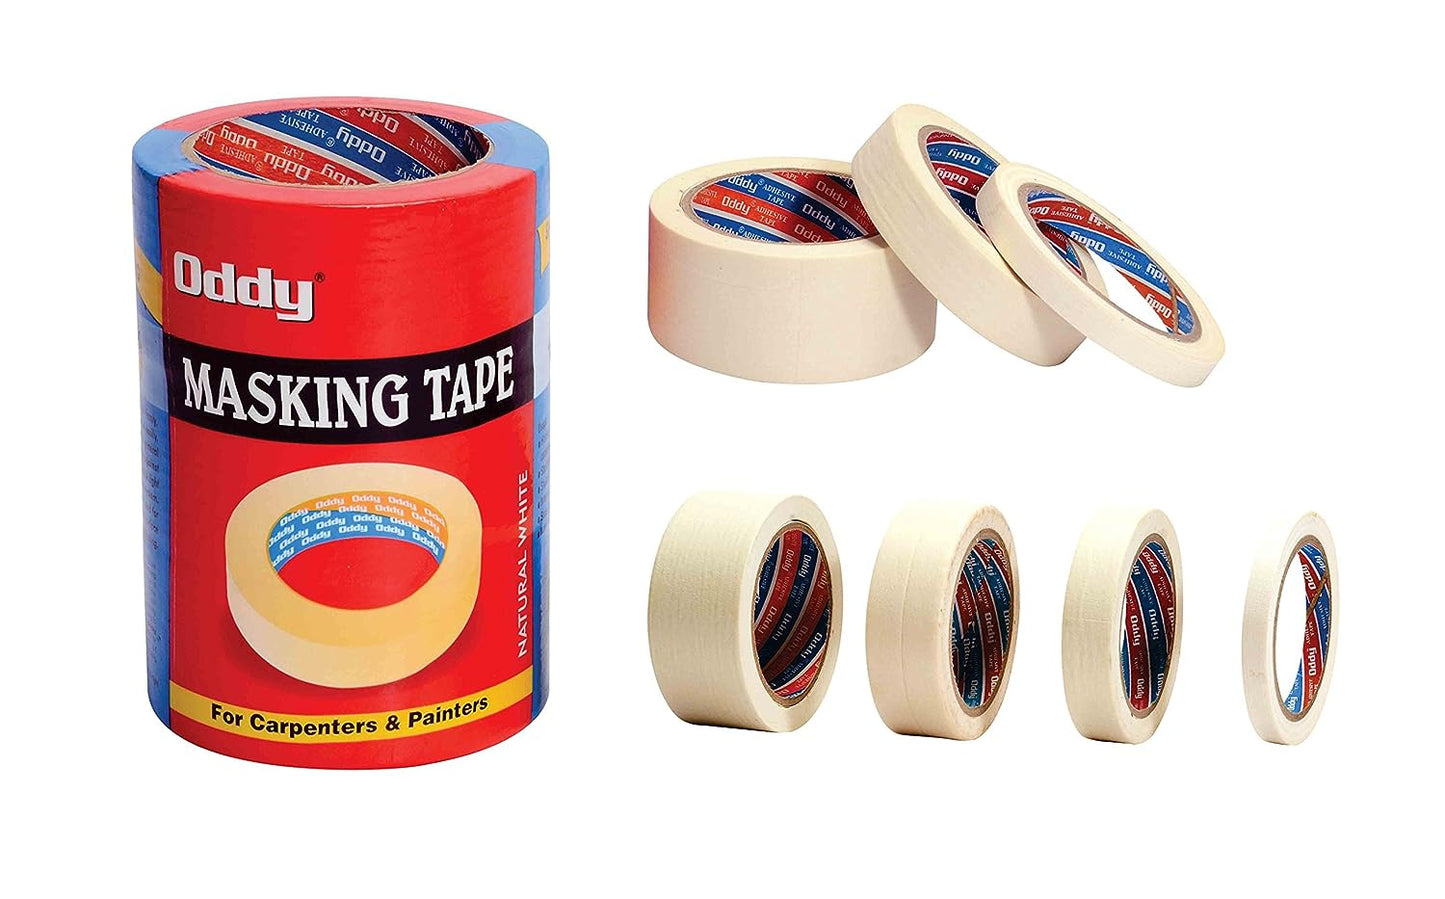 Oddy 36mm Super Strong Self Adhesive Masking Tape-30 Mtrs. (Set of 2)